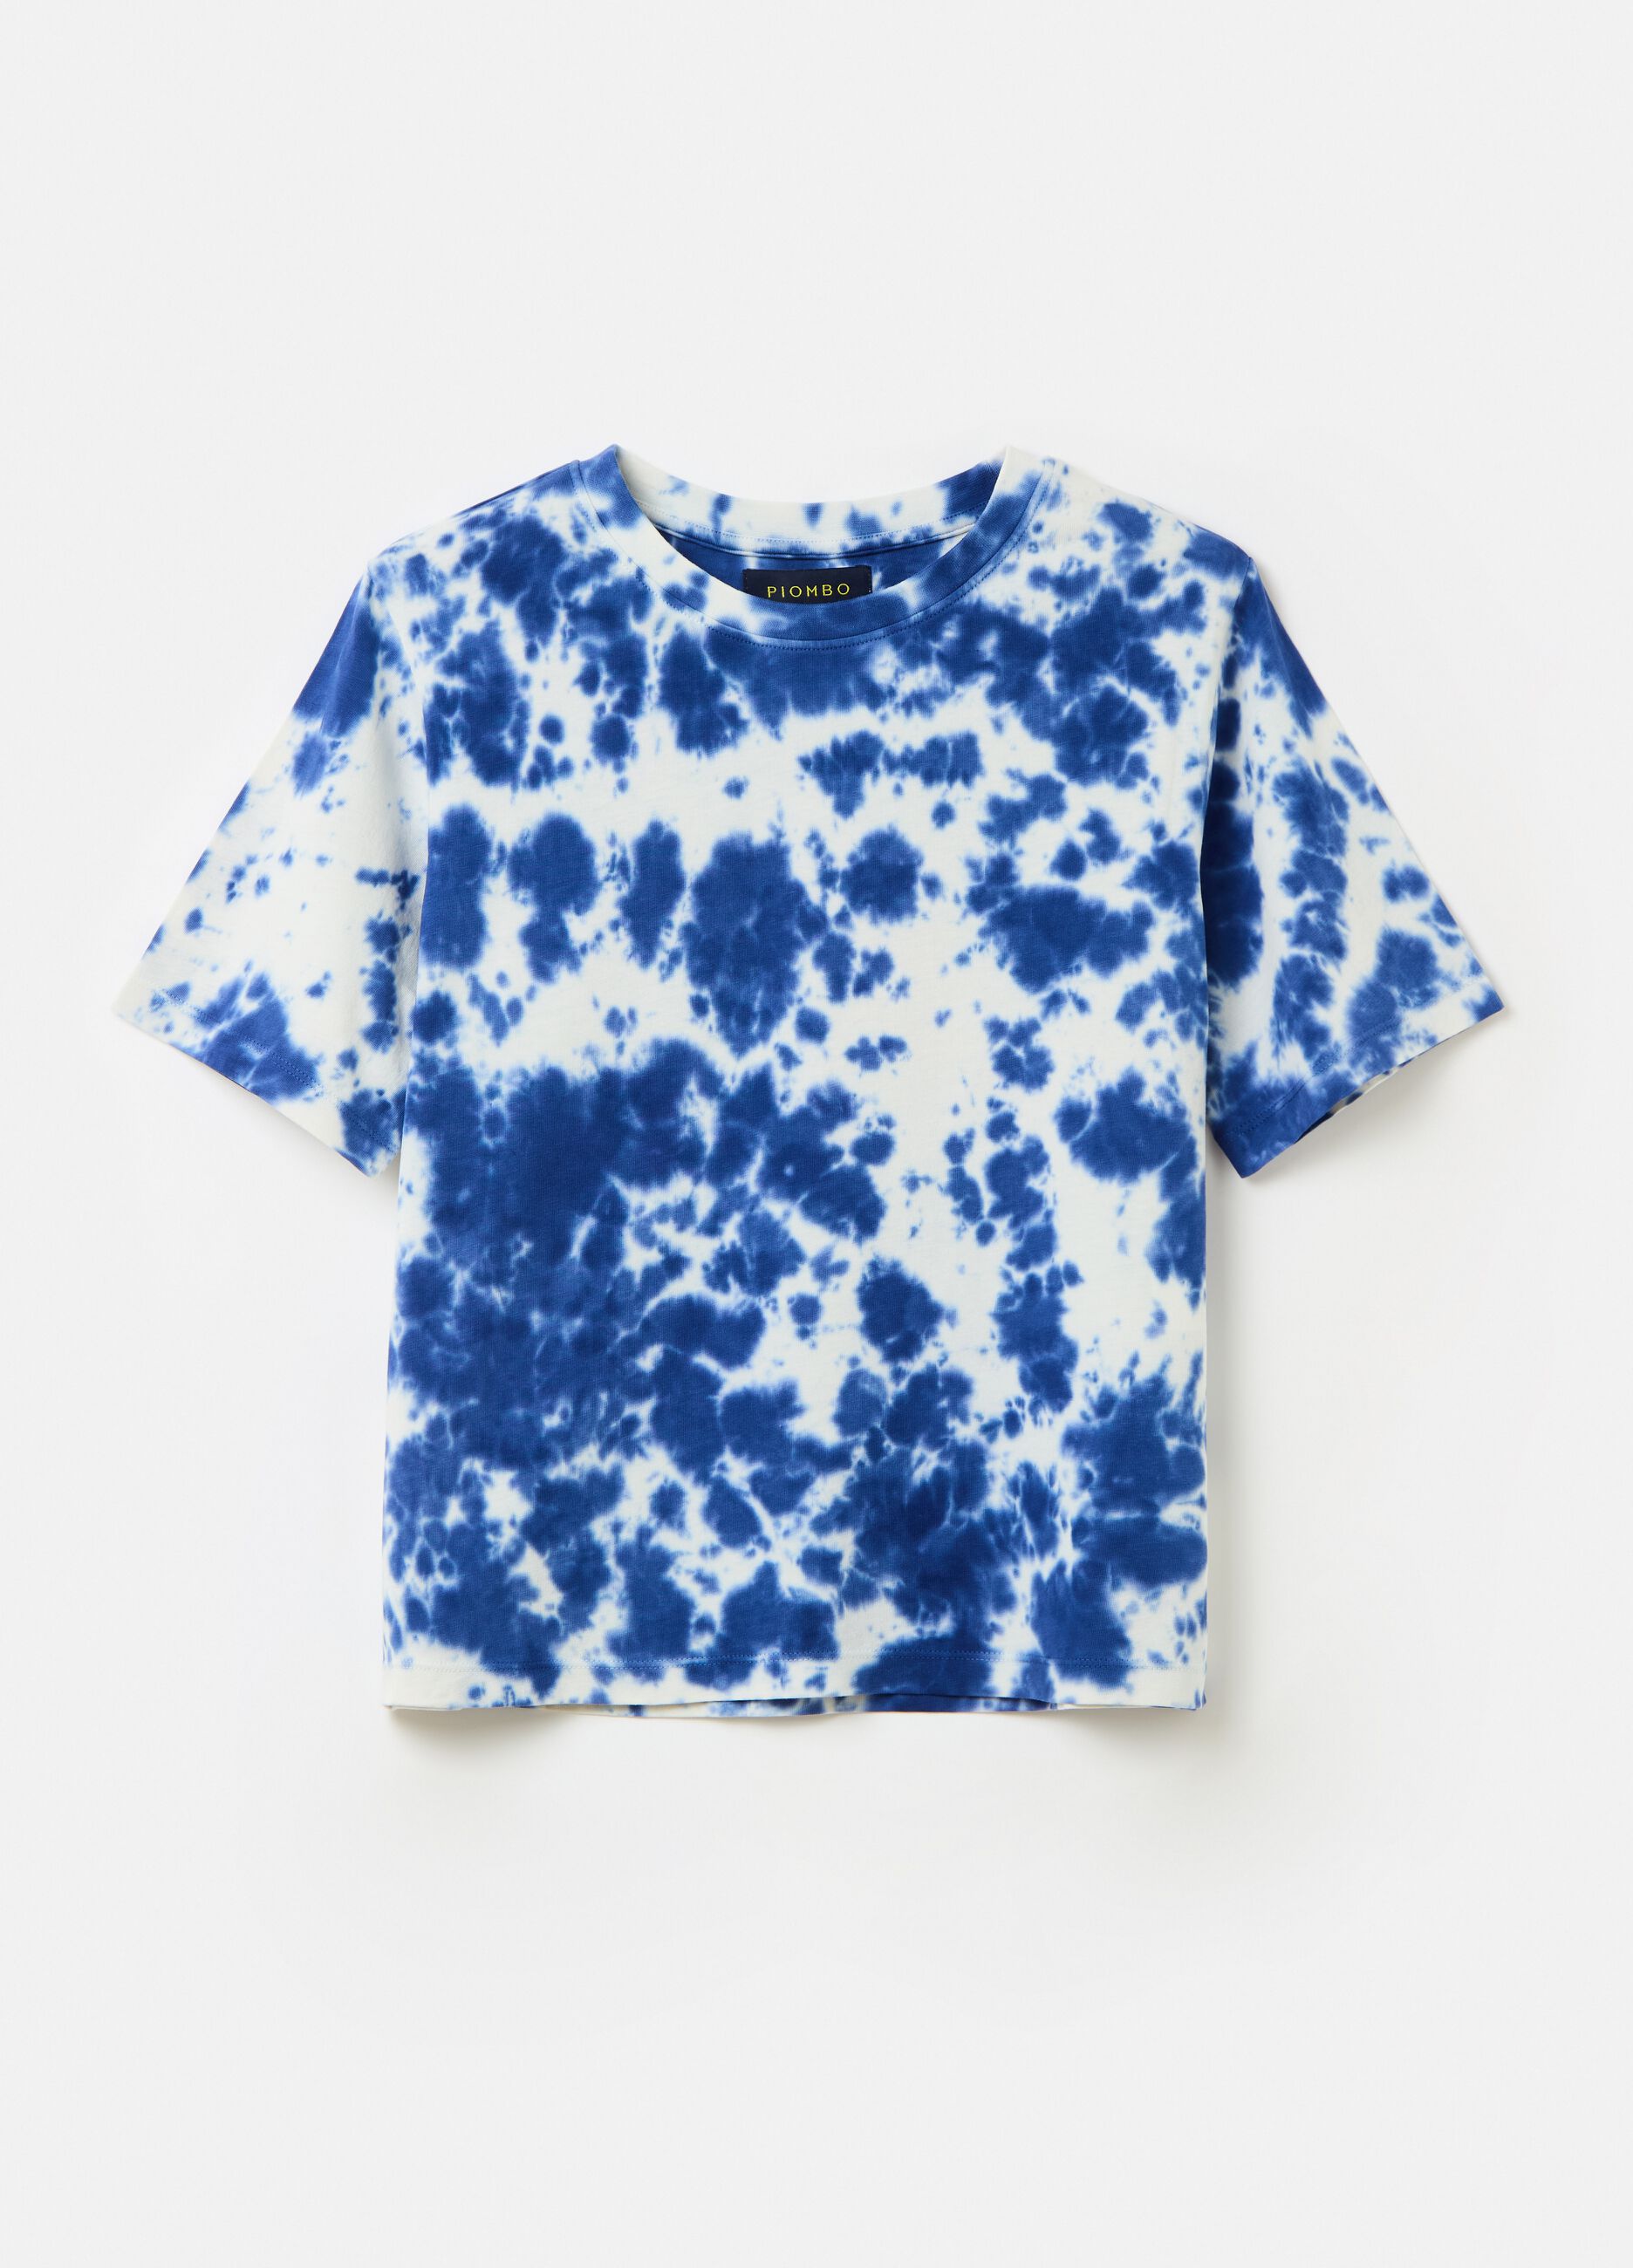 T-shirt in cotton with tie-dye print